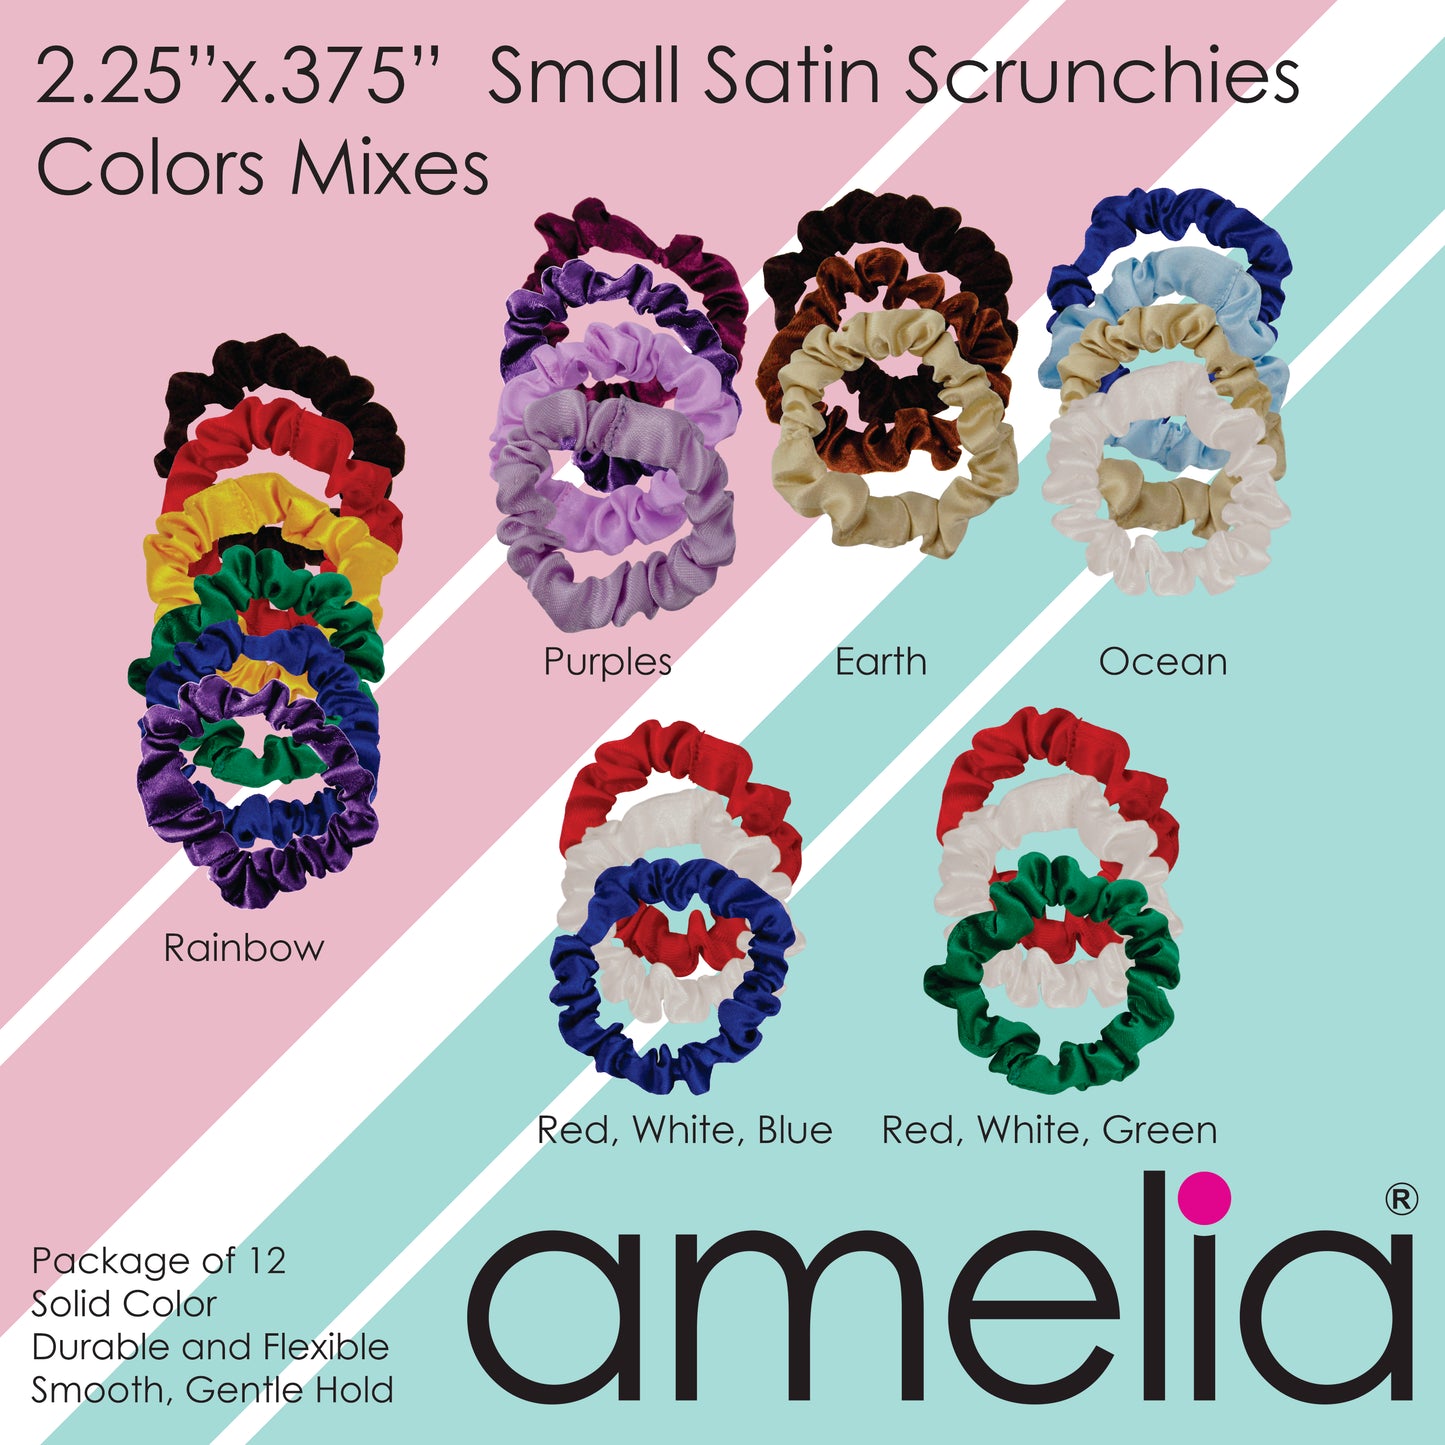 Amelia Beauty, Tan Satin Scrunchies, 2.25in Diameter, Gentle on Hair, Strong Hold, No Snag, No Dents or Creases. 12 Pack